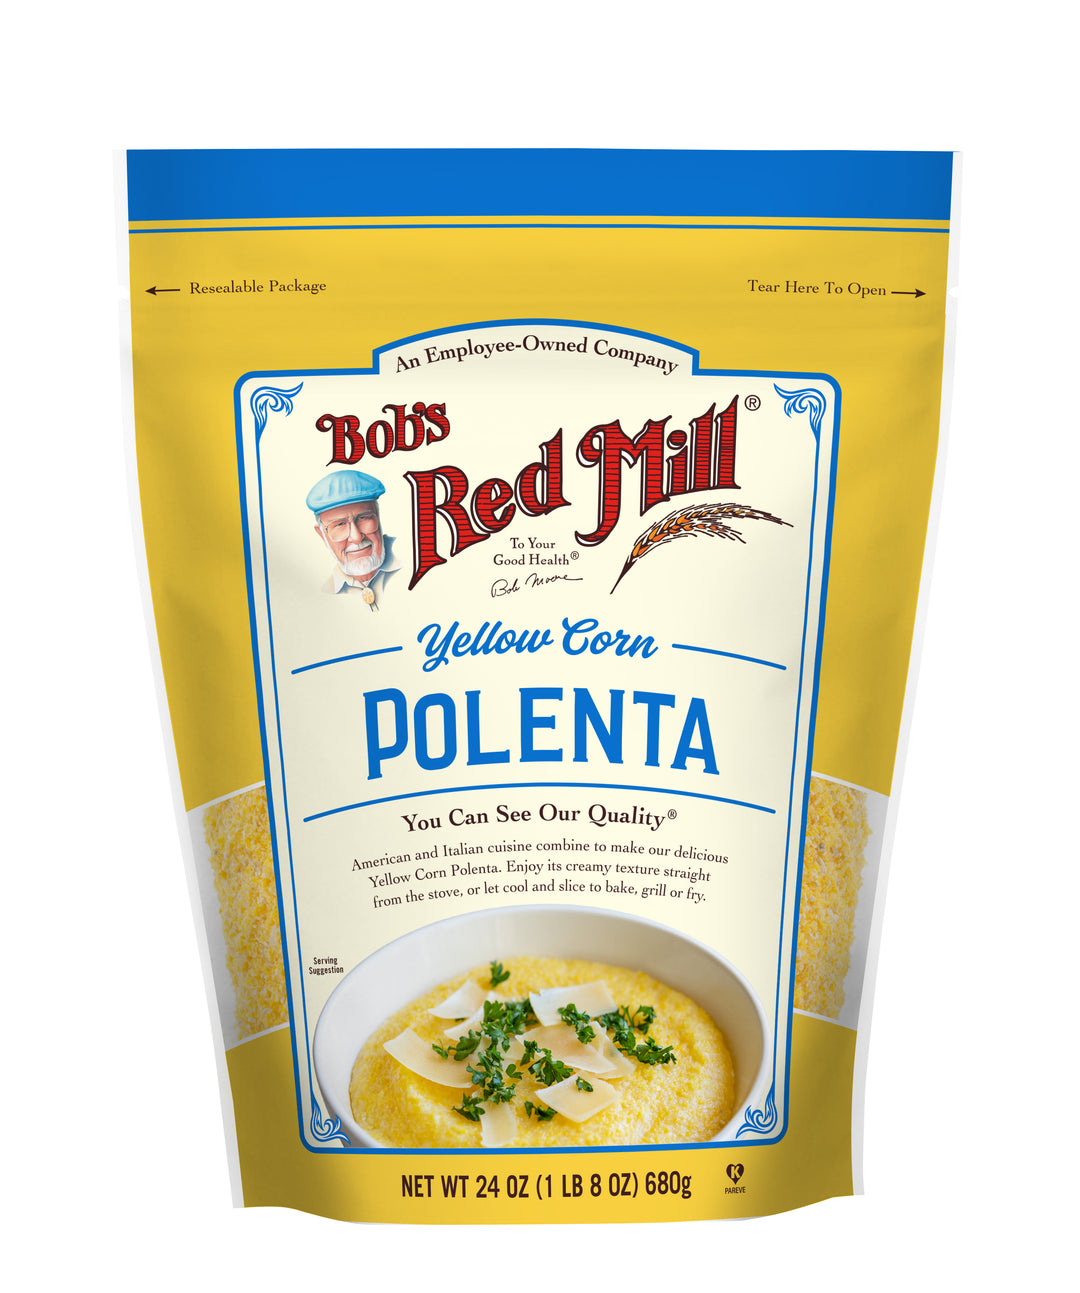 Bob's Red Mill Natural Foods Inc Corn Grits-24 oz.-4/Case